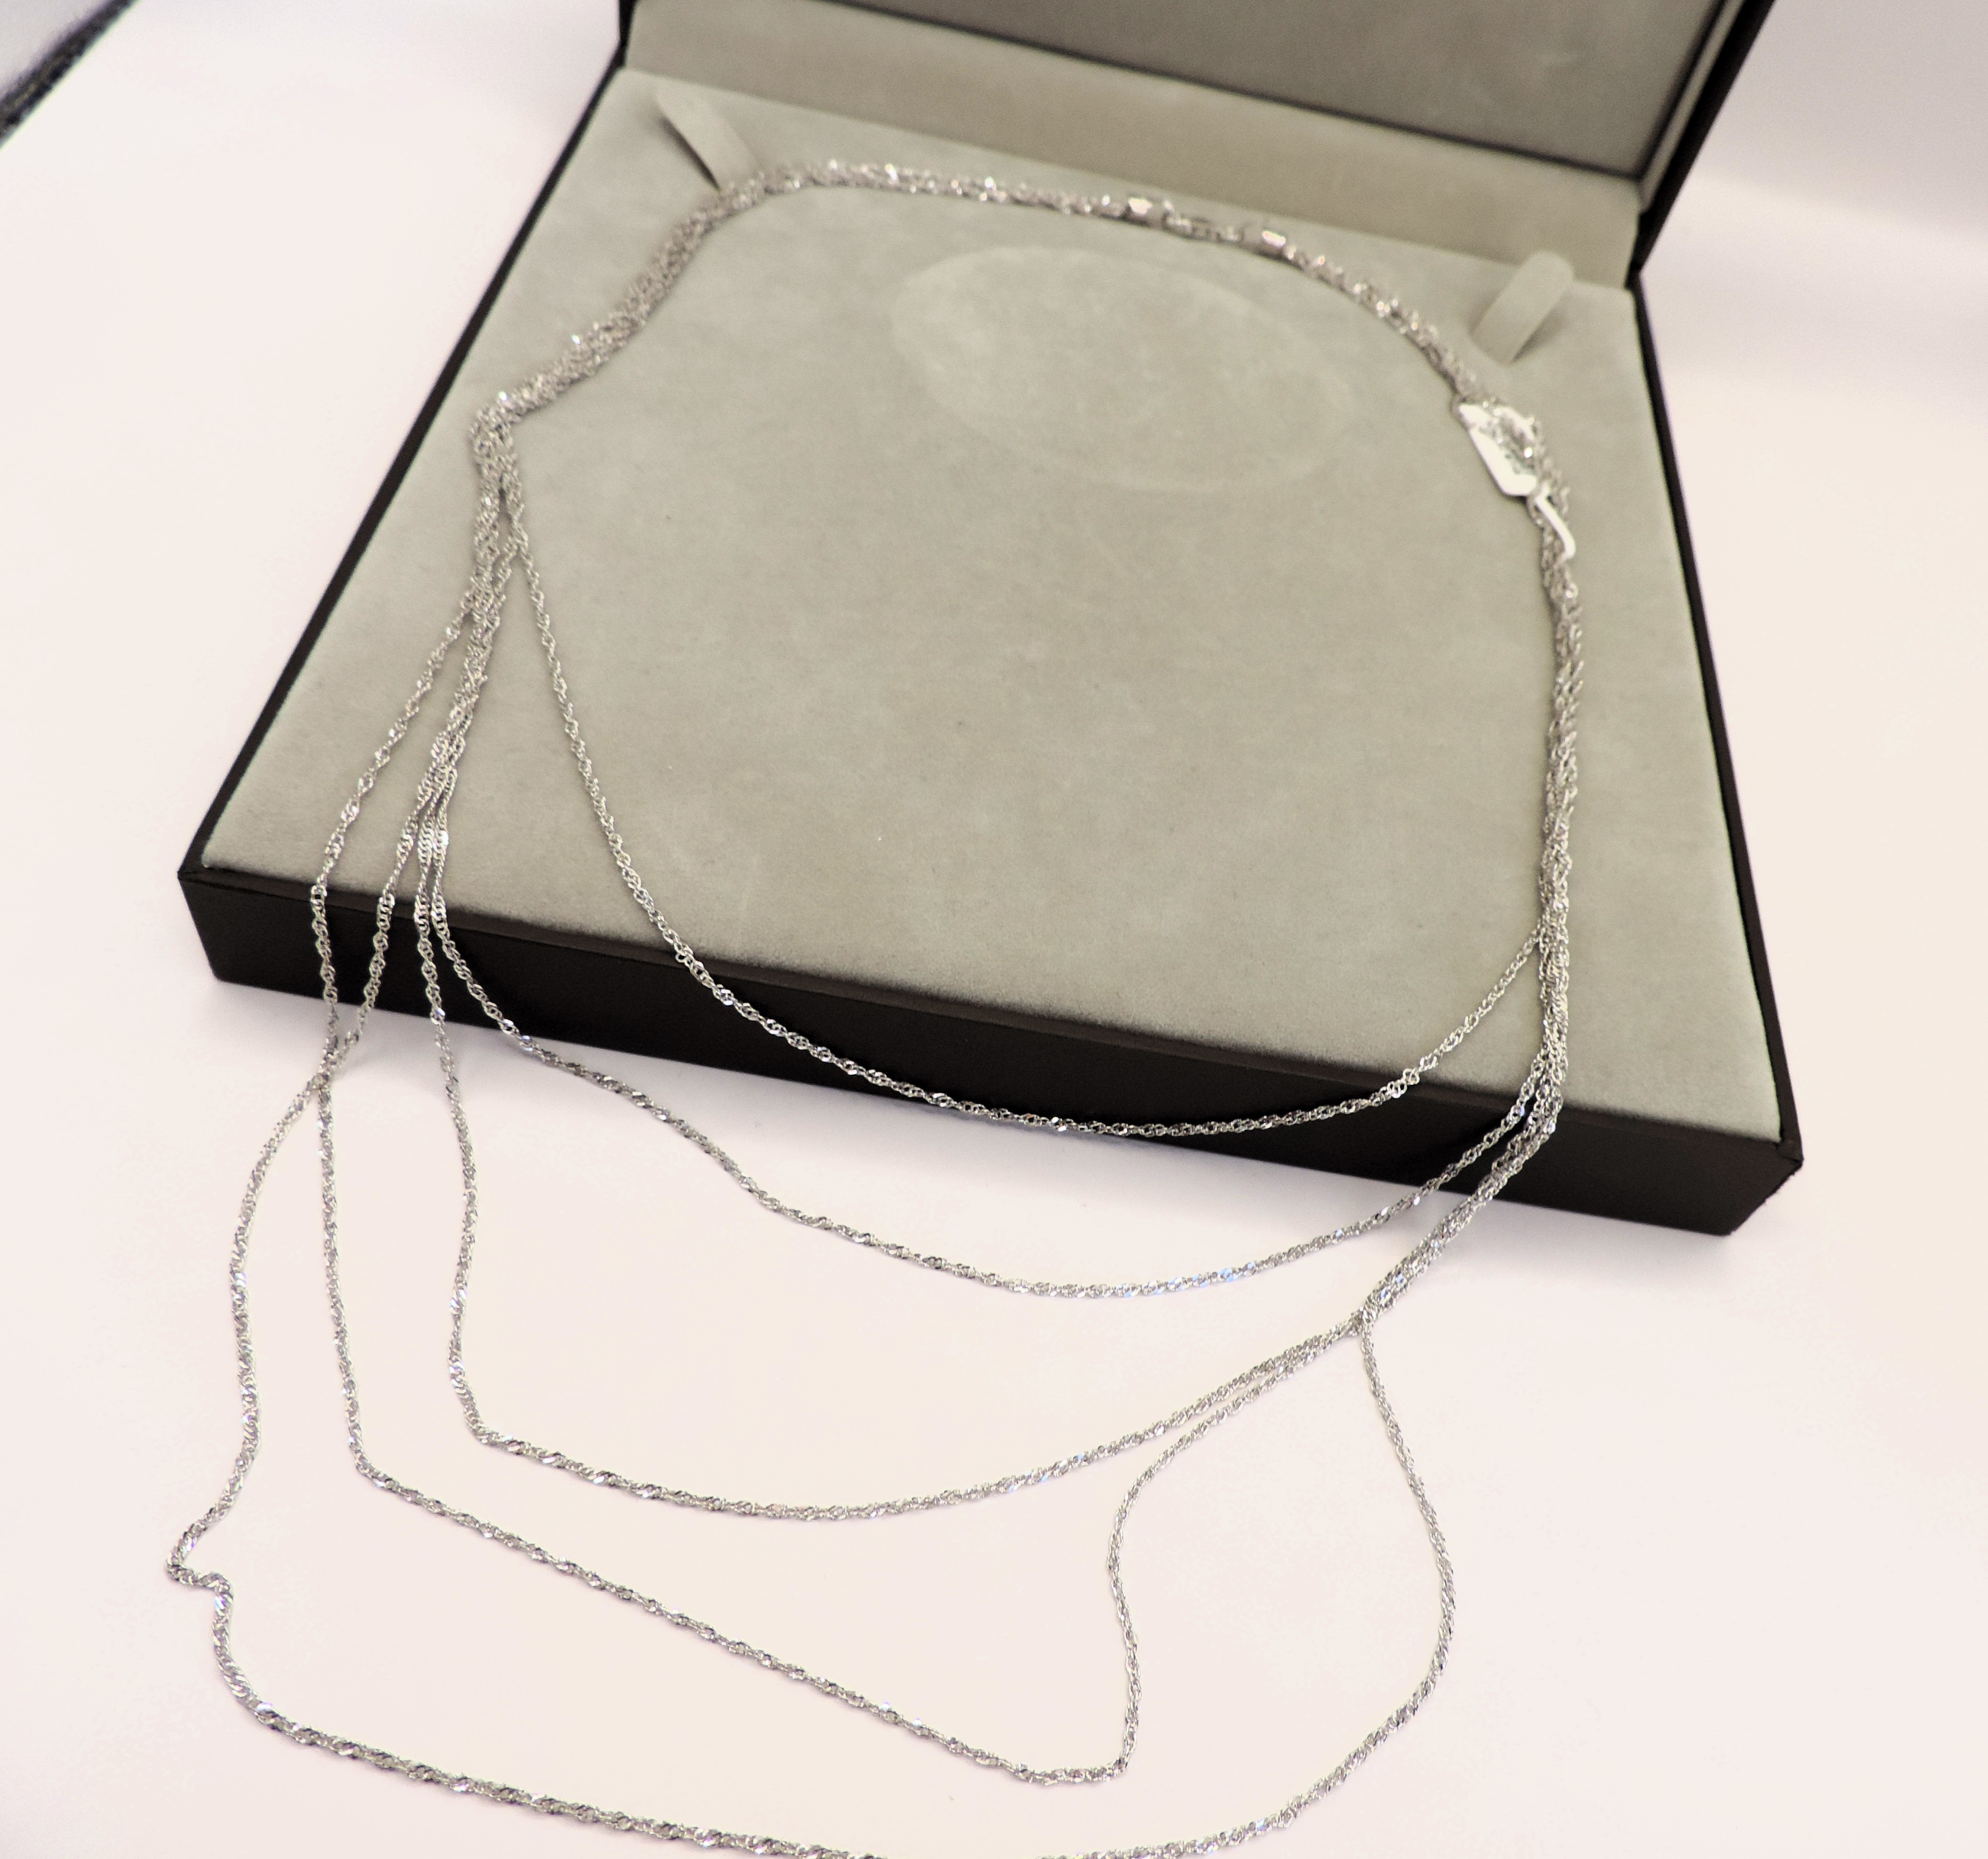 Sterling silver 5 Strand Diamond Cut Waterfall Chain Necklace New with Gift Box - Image 3 of 4